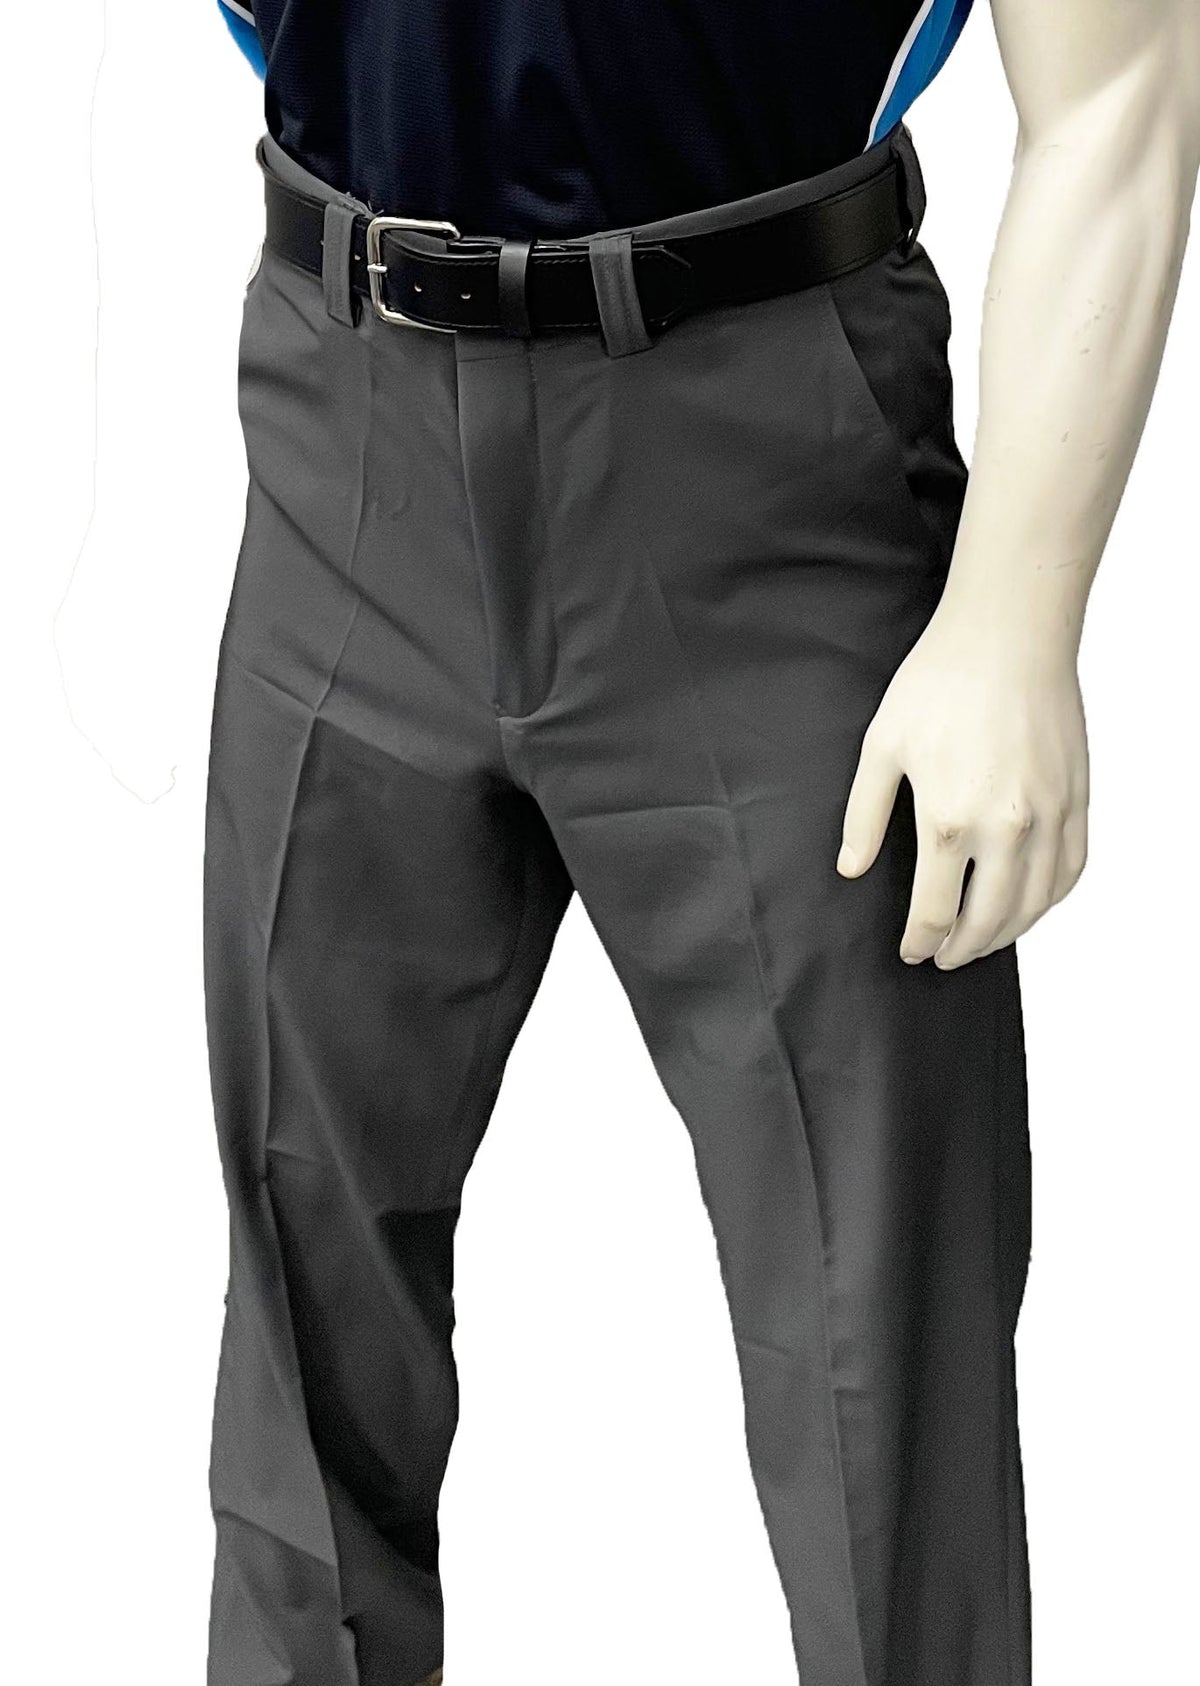 Smitty | BBS-353 | 4-Way Stretch Flat Front Base Umpire Pants | Charcoal Grey